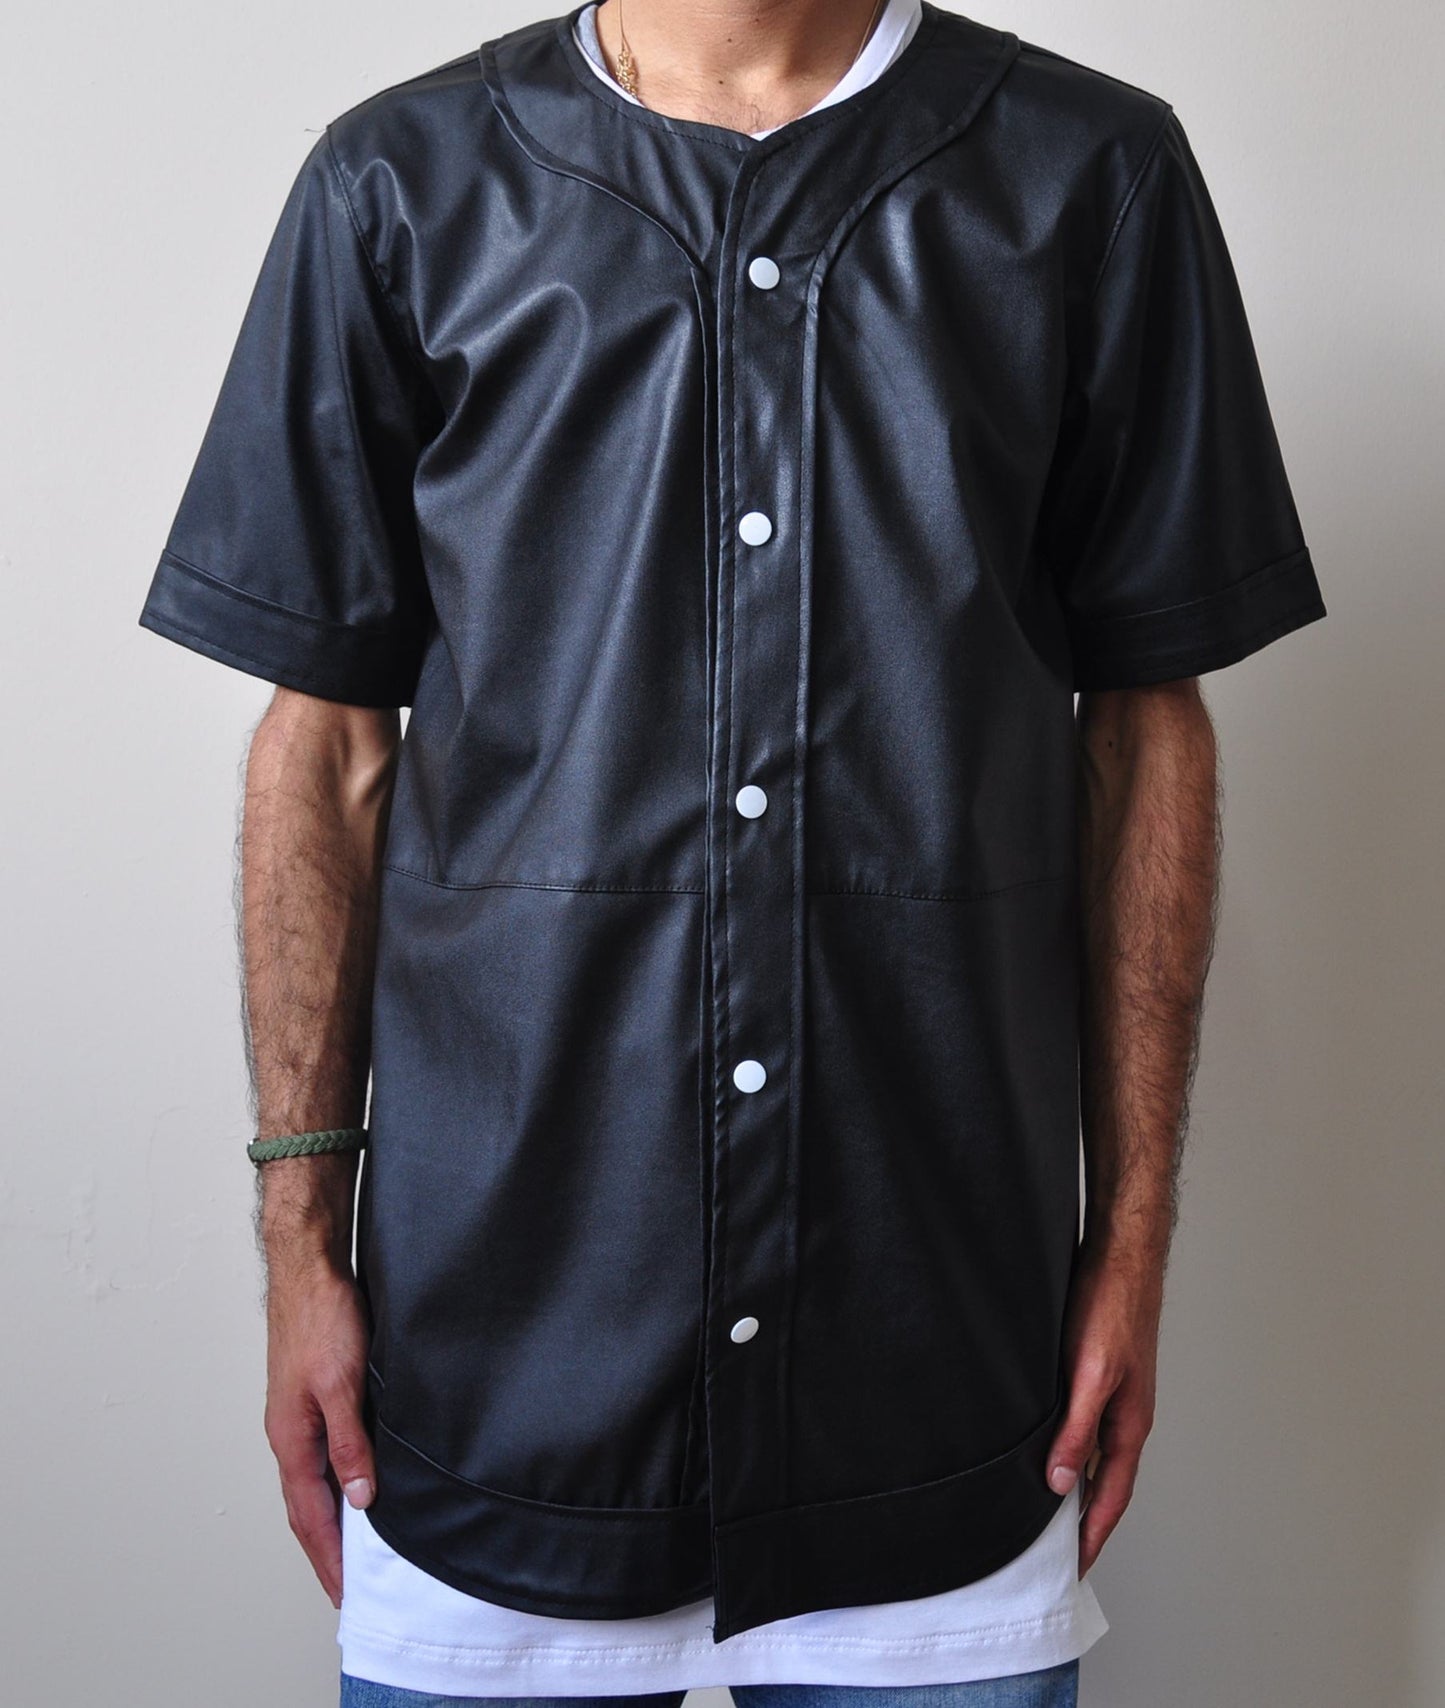 Perforated Leather Baseball Jersey